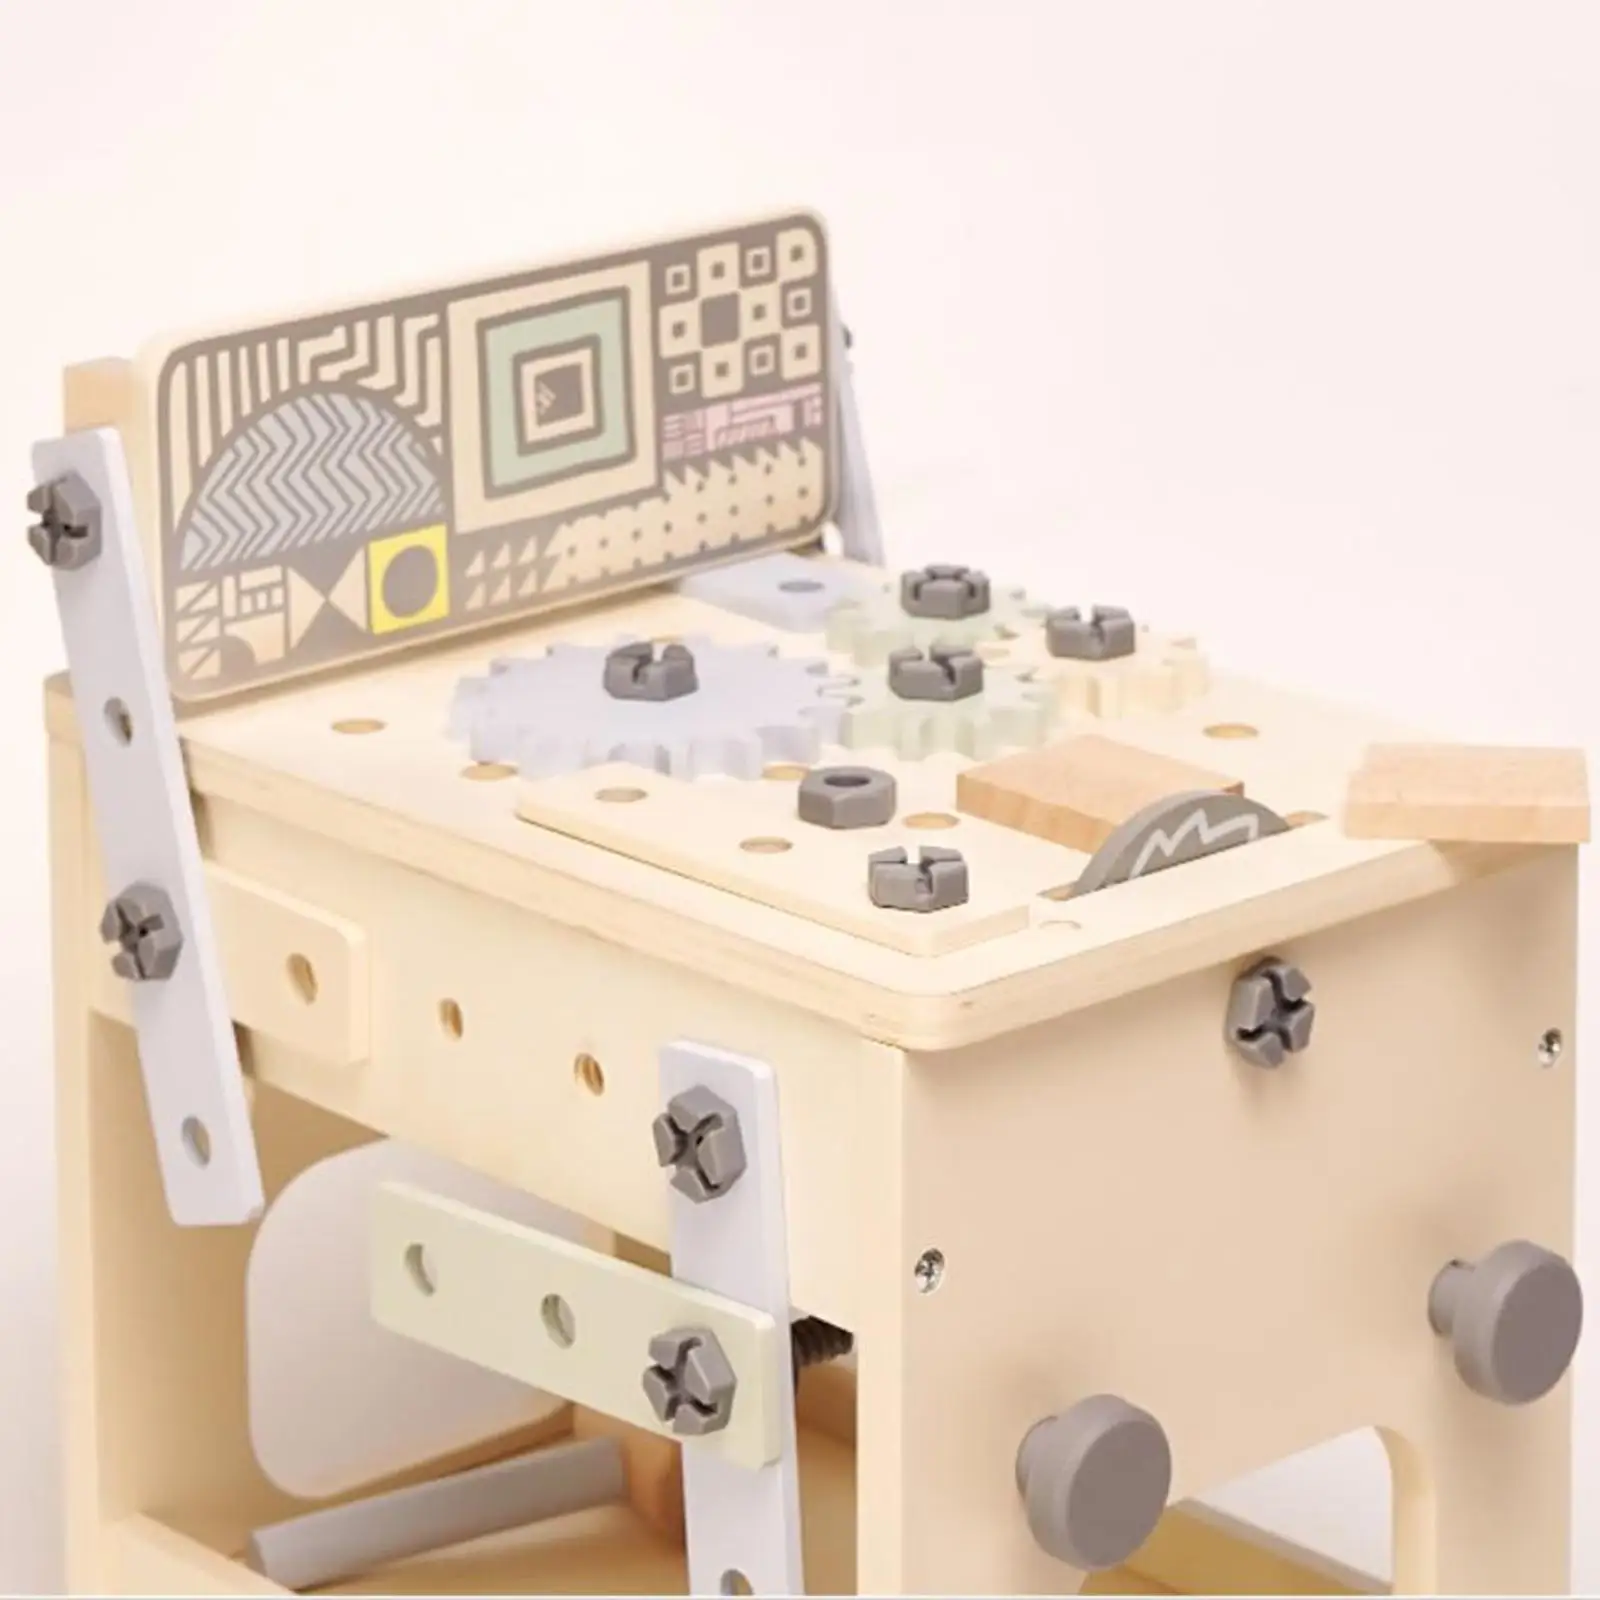 Tool Bench Set Developmental Early Educational Toy Creative Construction Building Toy for Education Learning Preschool Outdoor